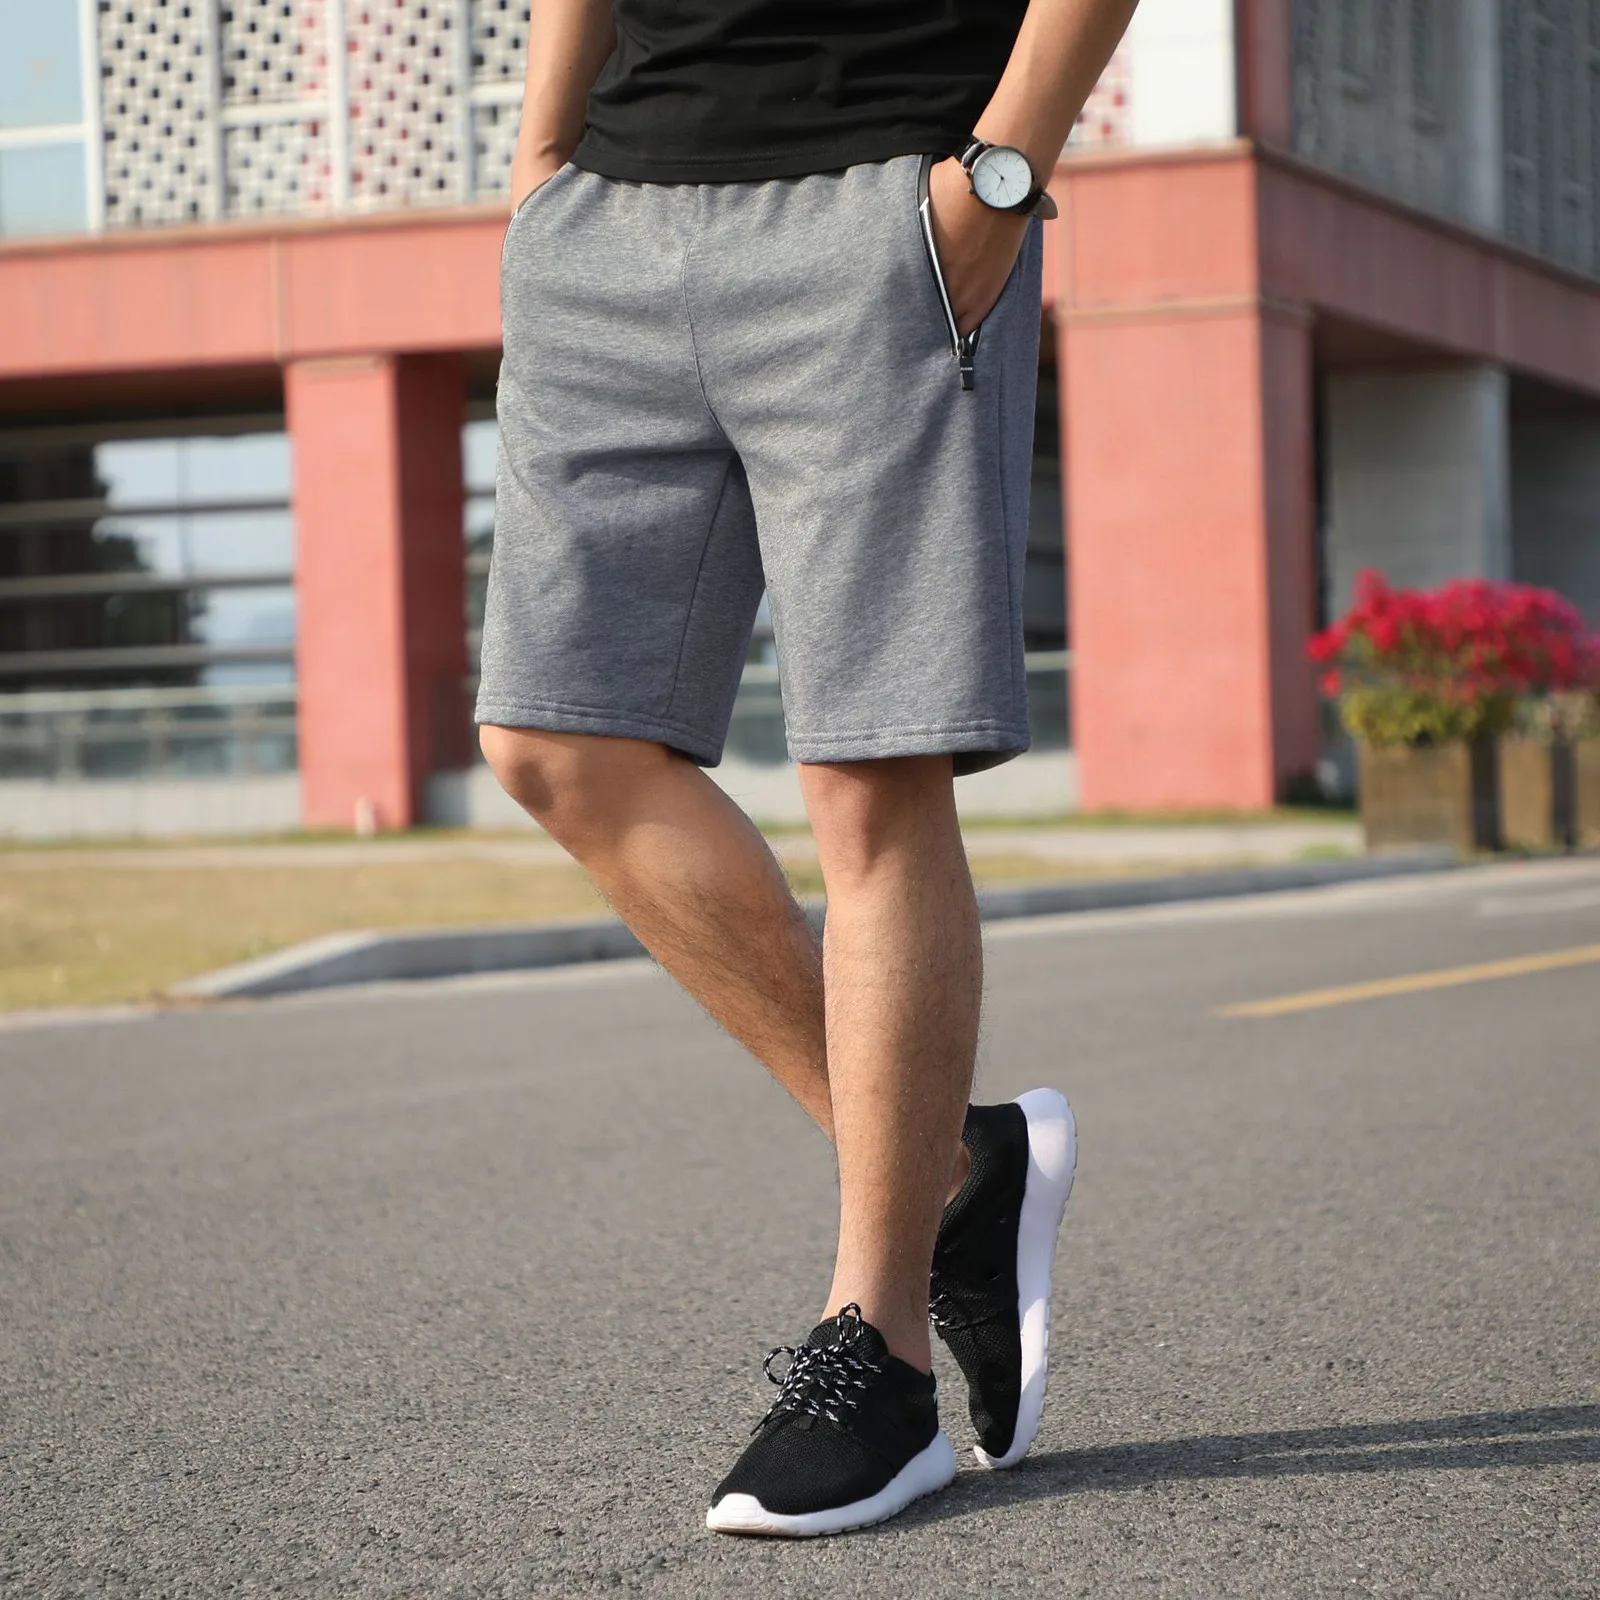 

Men's Shorts Tom Tailor Beautiful Fashionable Modern Comfortable Colorful New Brand Pocket Quick Dry For Men Casual Shorts#3